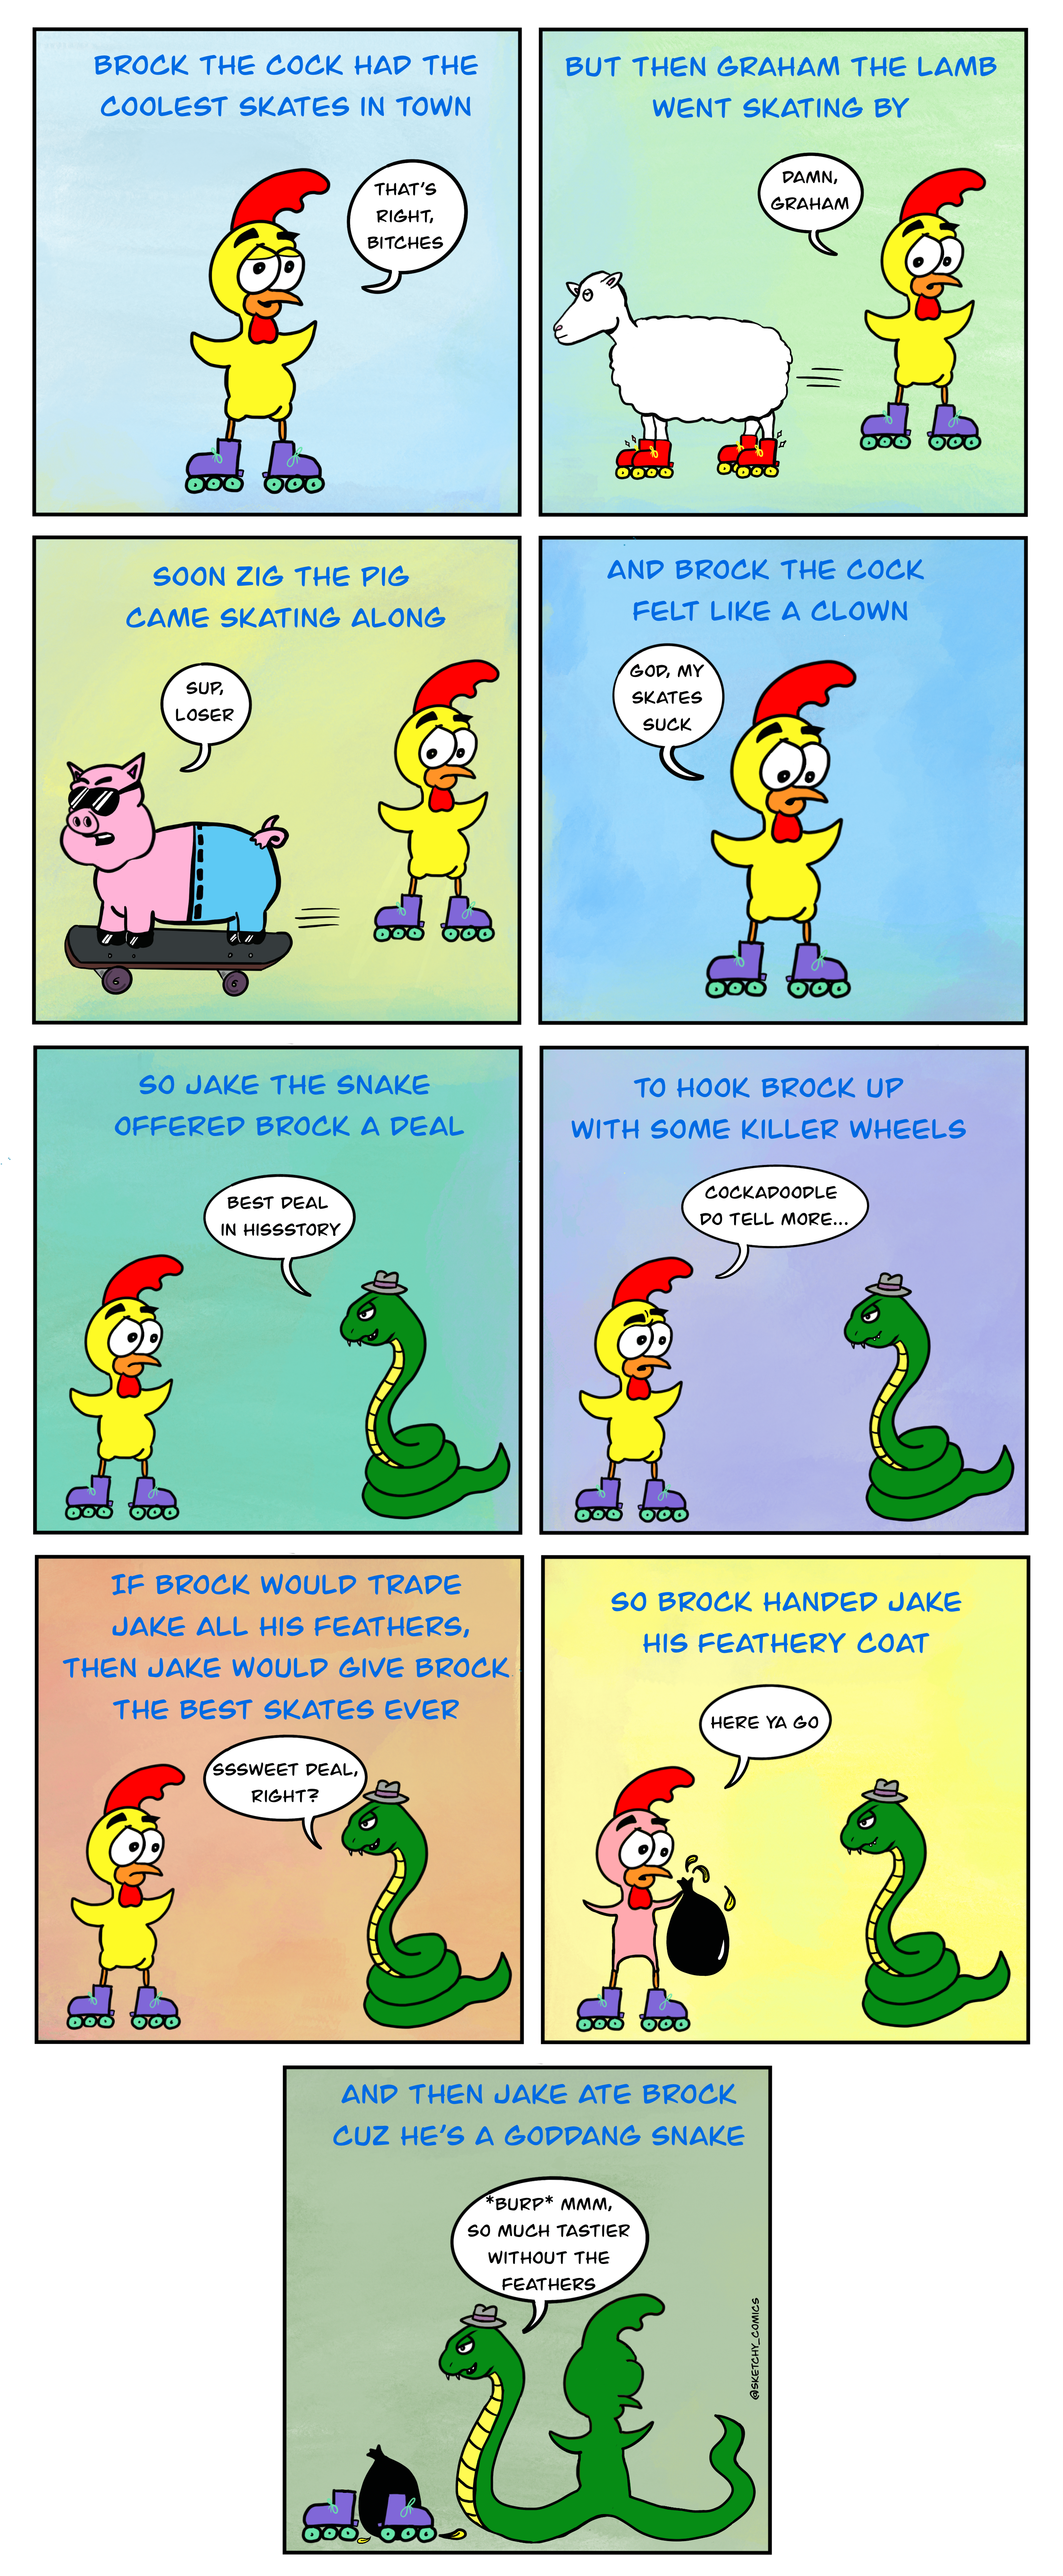 The Tale of Brock the Cock